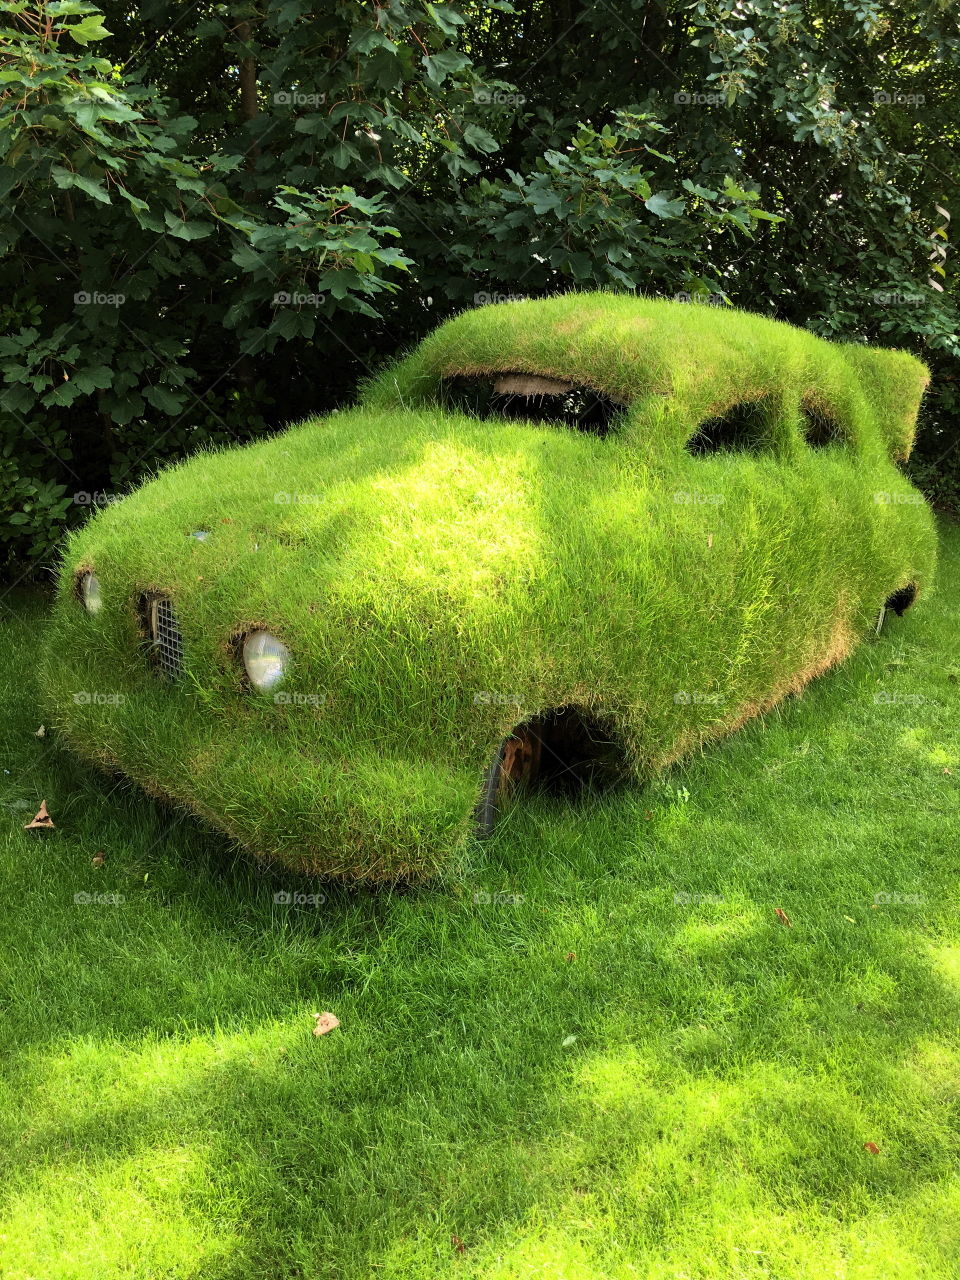 Sunlight reflecting on the car covered by grass